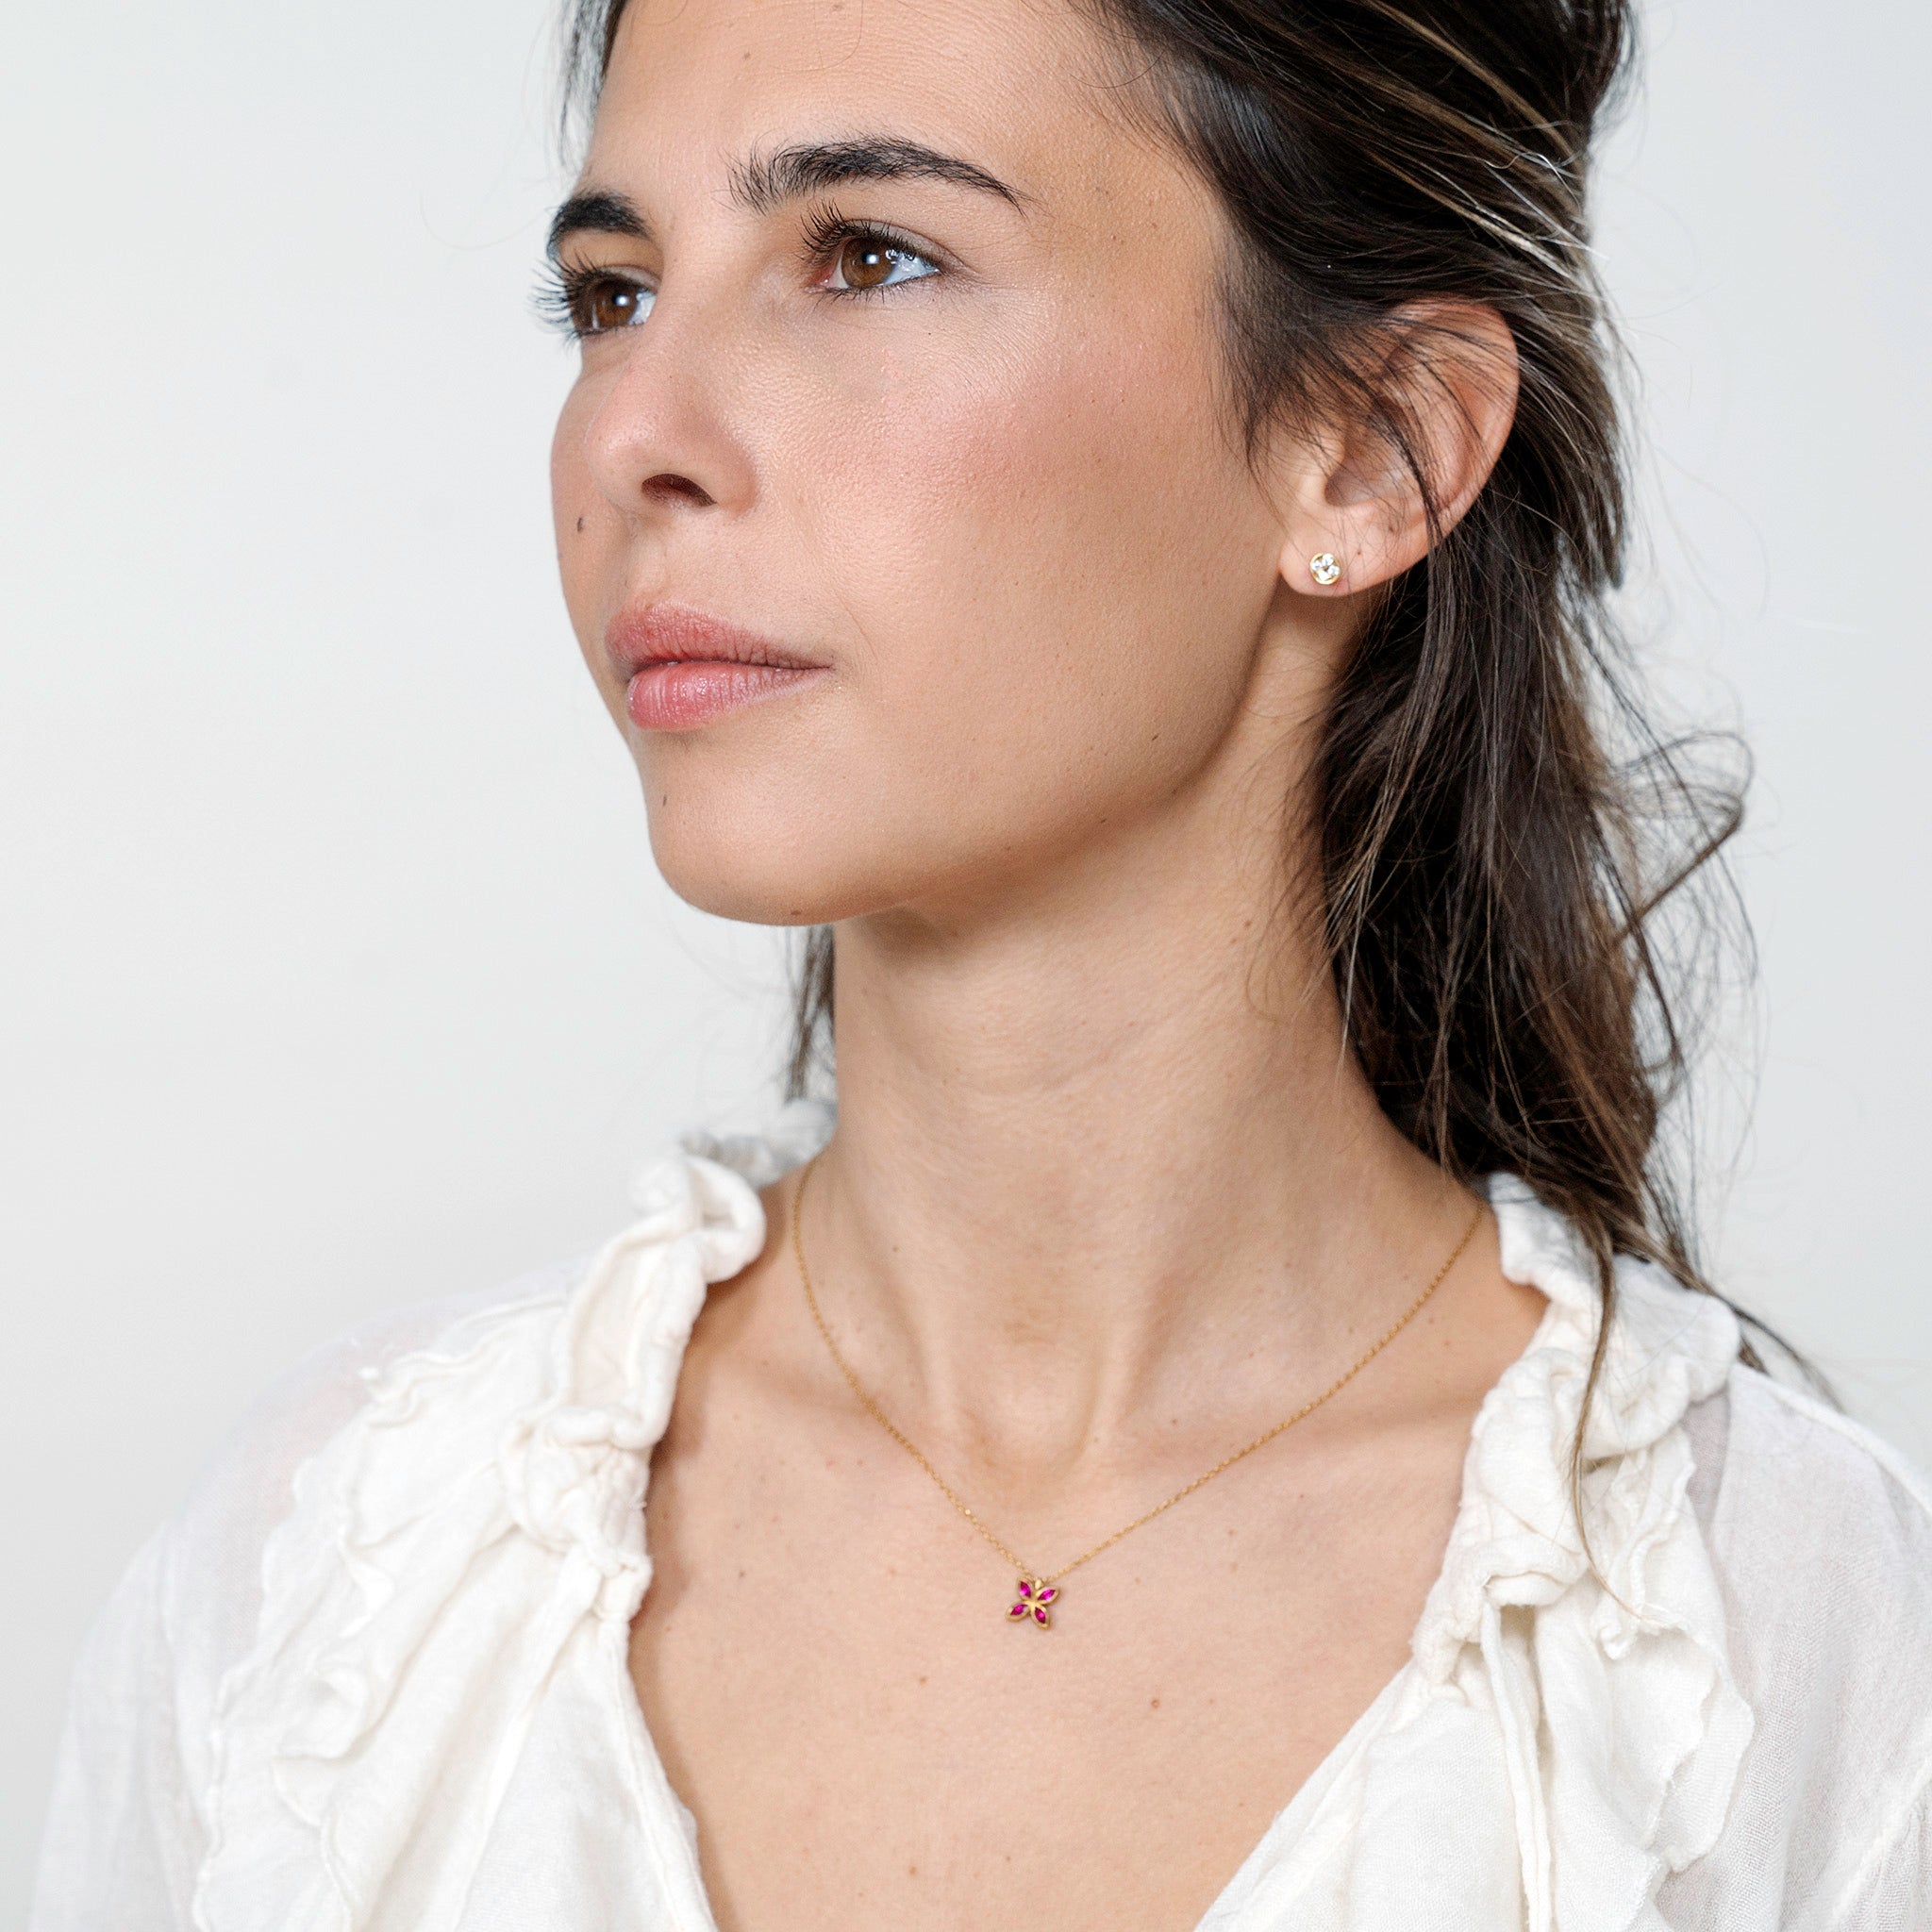 Model beautifully wearing the Gold Spring Flowers pendant, with marquise-cut Rubies forming an intricate flower, enhancing any outfit with a luxurious touch of spring.